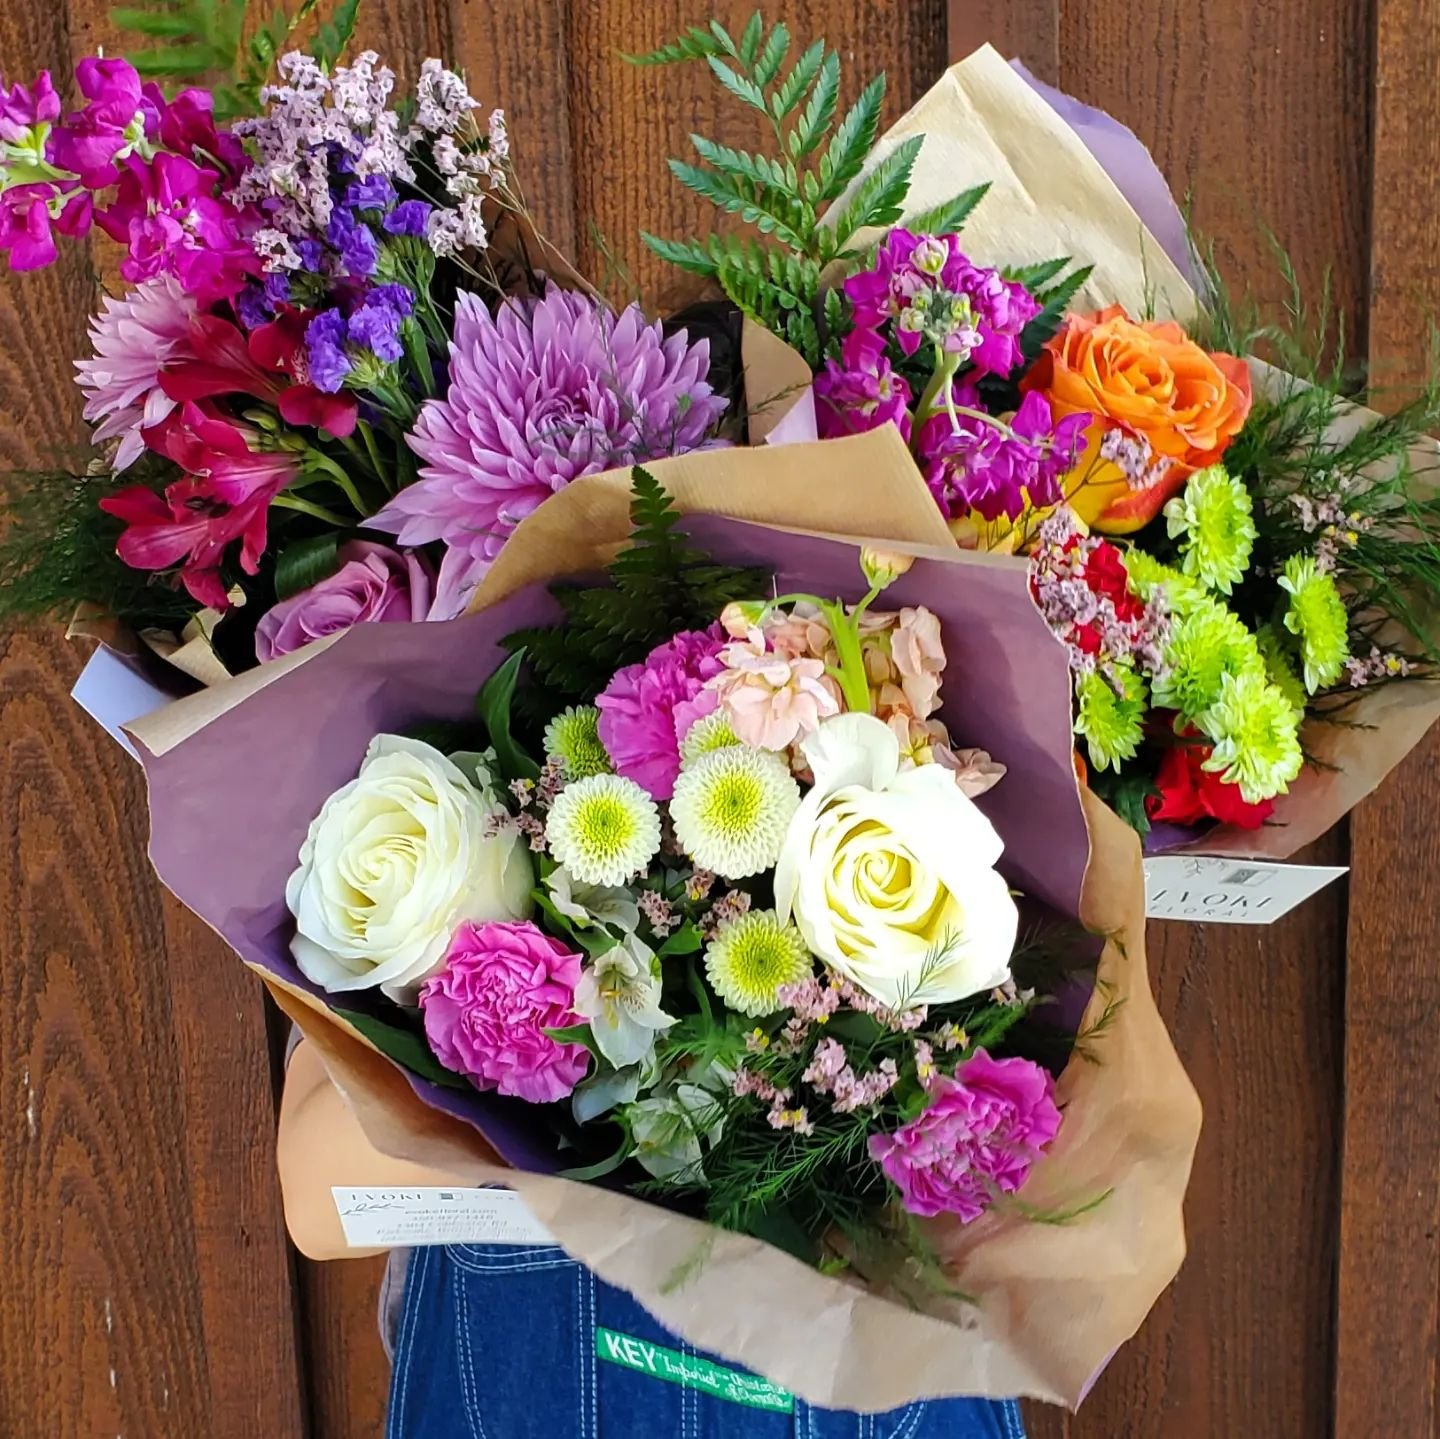 If you're still looking for something special for mom, Evoke Floral has you covered with these stunning arrangements!💐 We are open until 5pm today - see you soon 😍